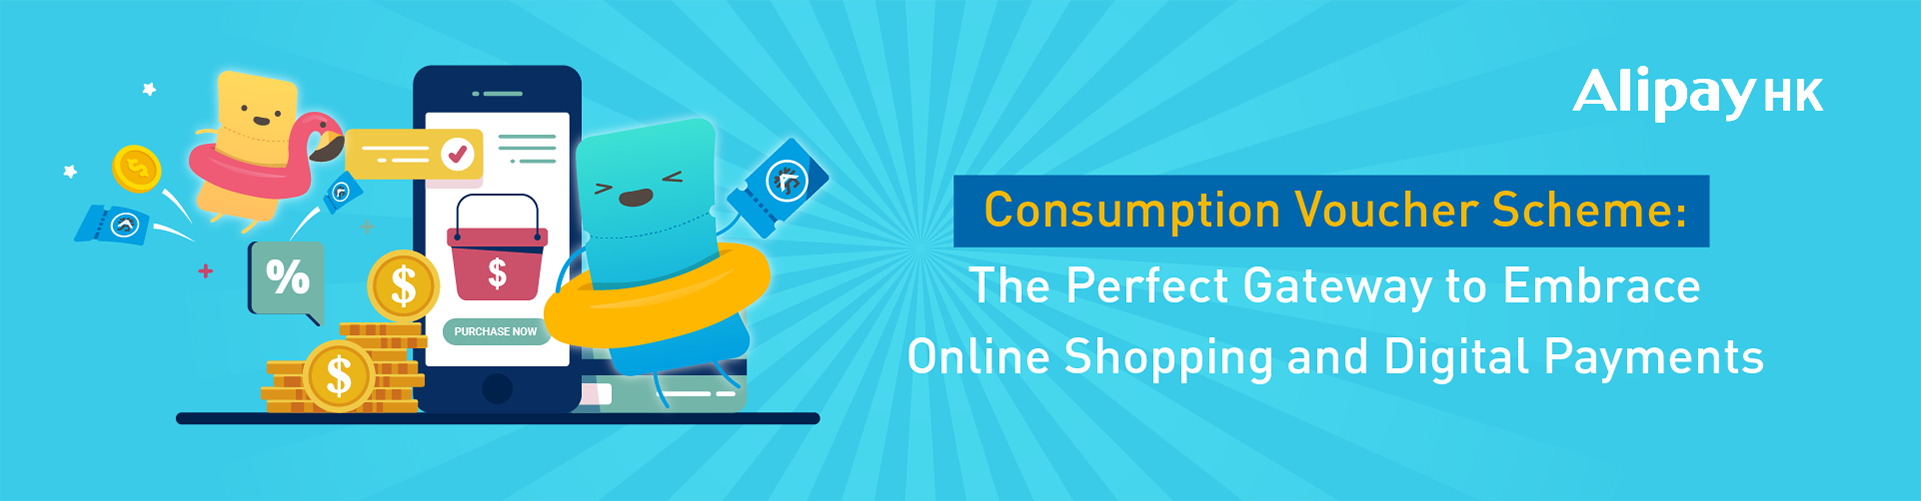 Consumption Voucher Scheme: The Perfect Gateway to Embrace Online Shopping and Digital Payments